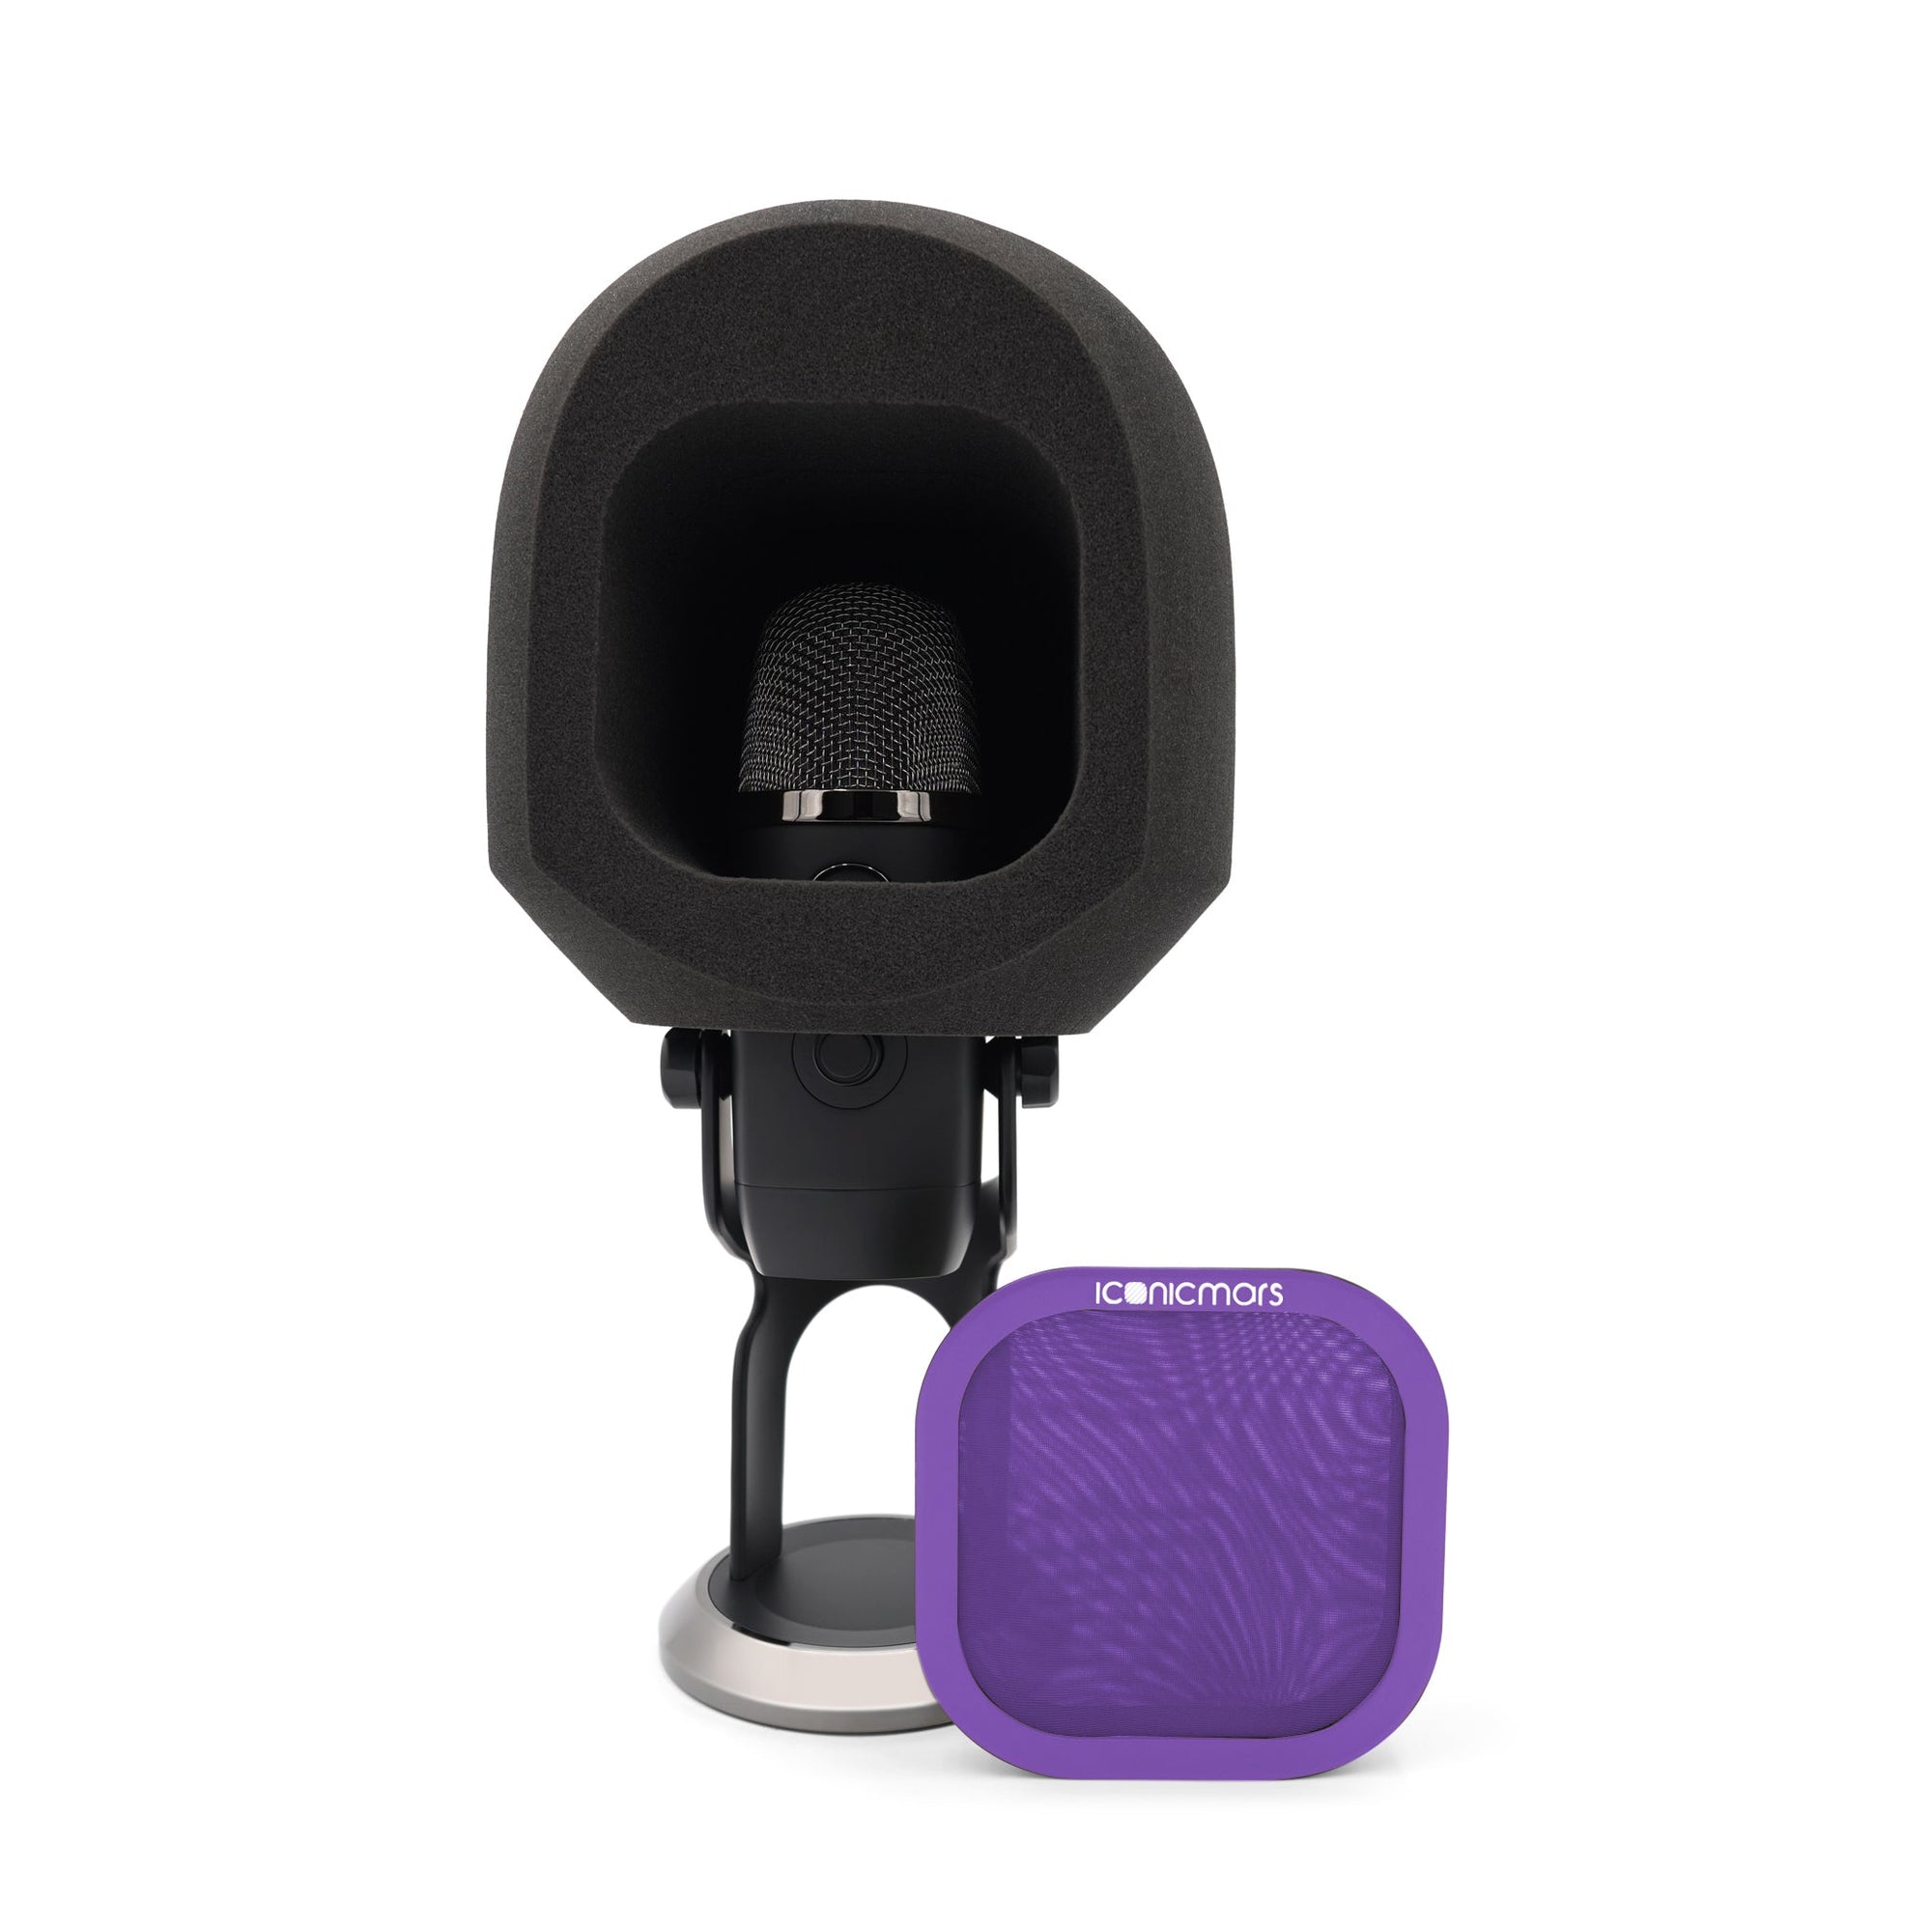 The Comet X Eye ball like isolation booth with pop filter off showing microphone acoustic isolation chamber  -- Purple Berry